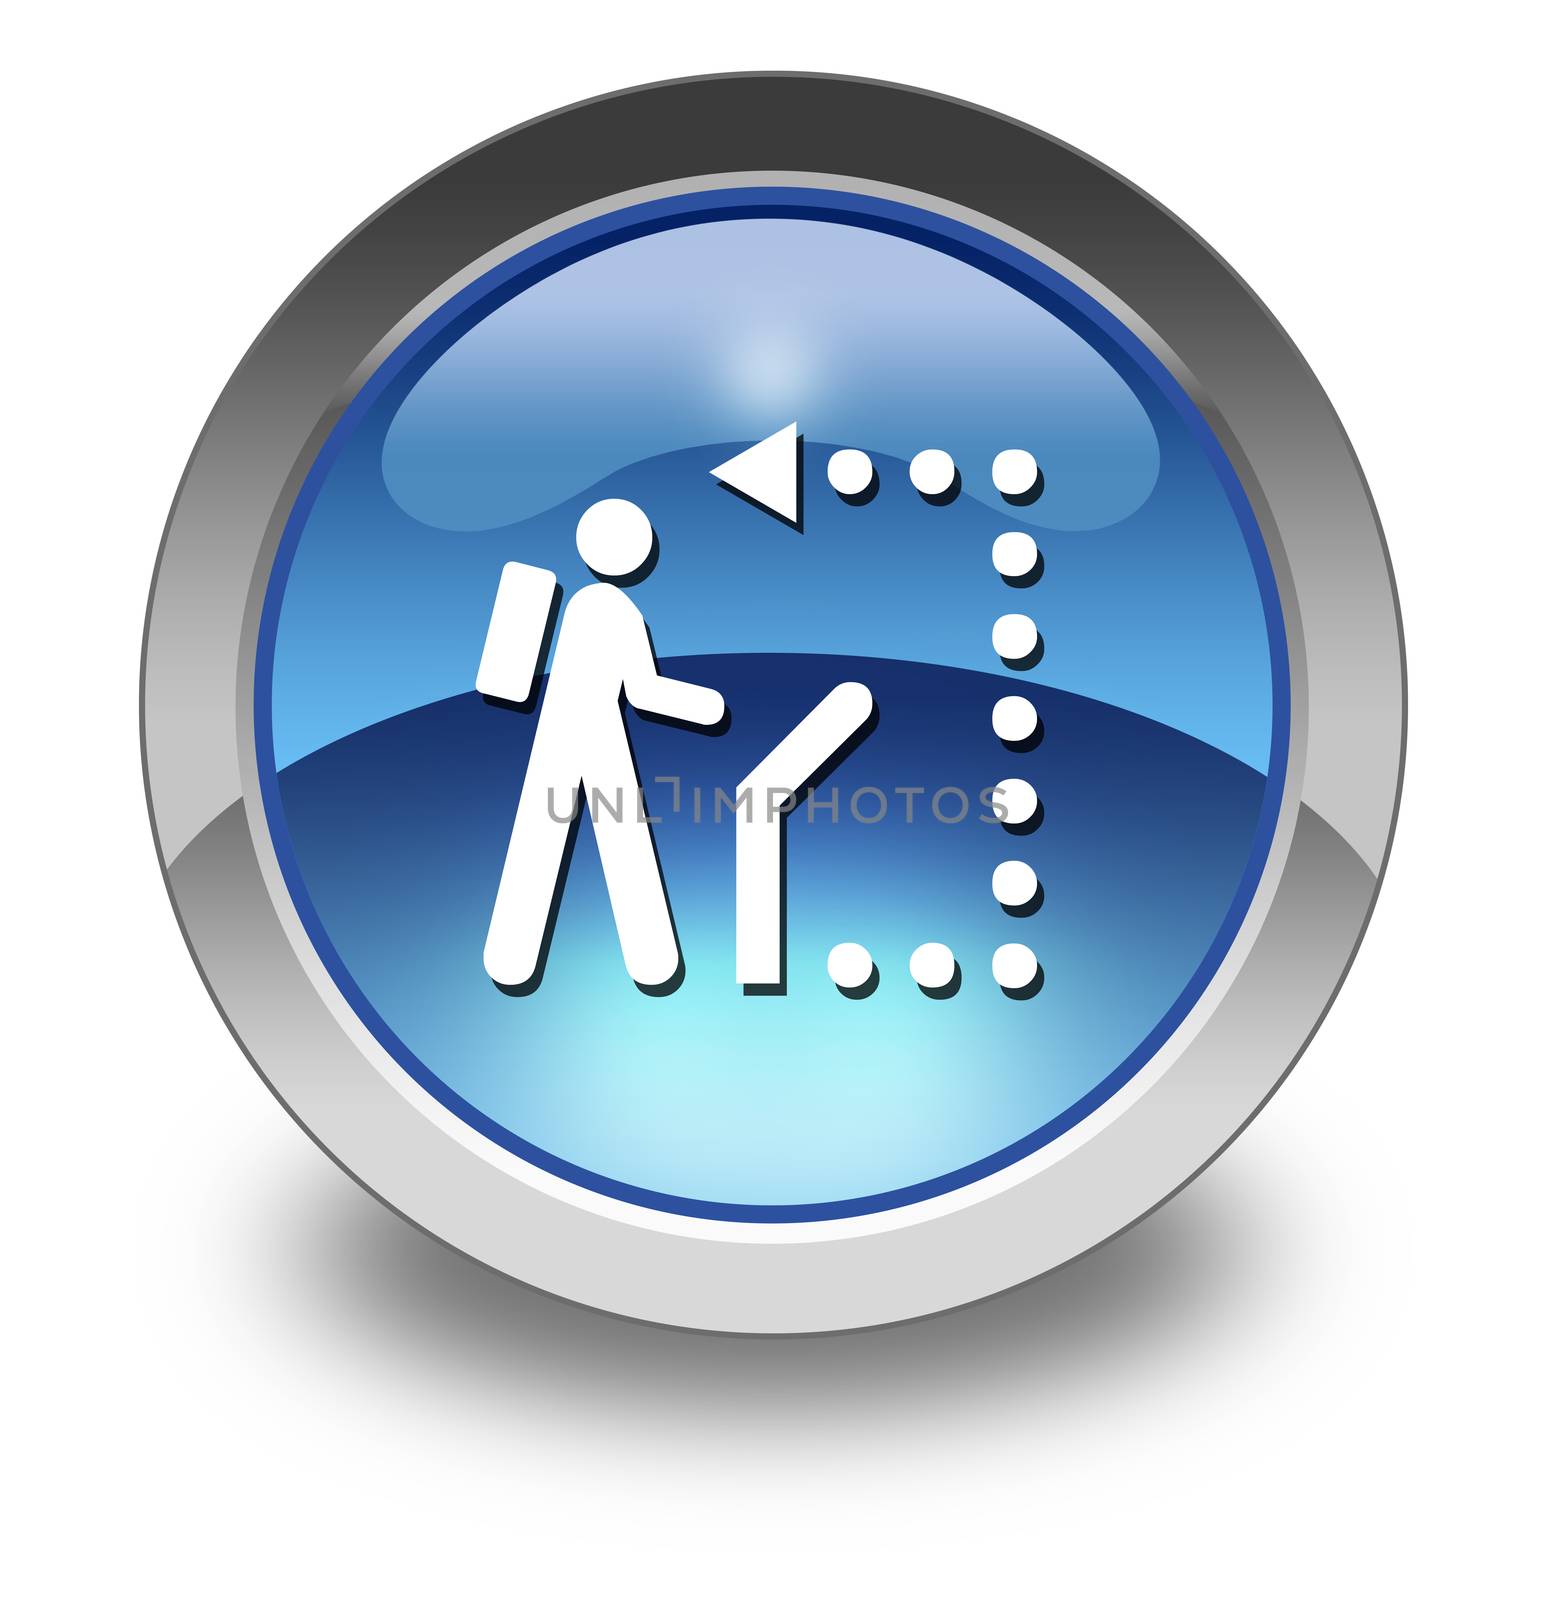 Icon, Button, Pictogram Self-Guiding Trail by mindscanner